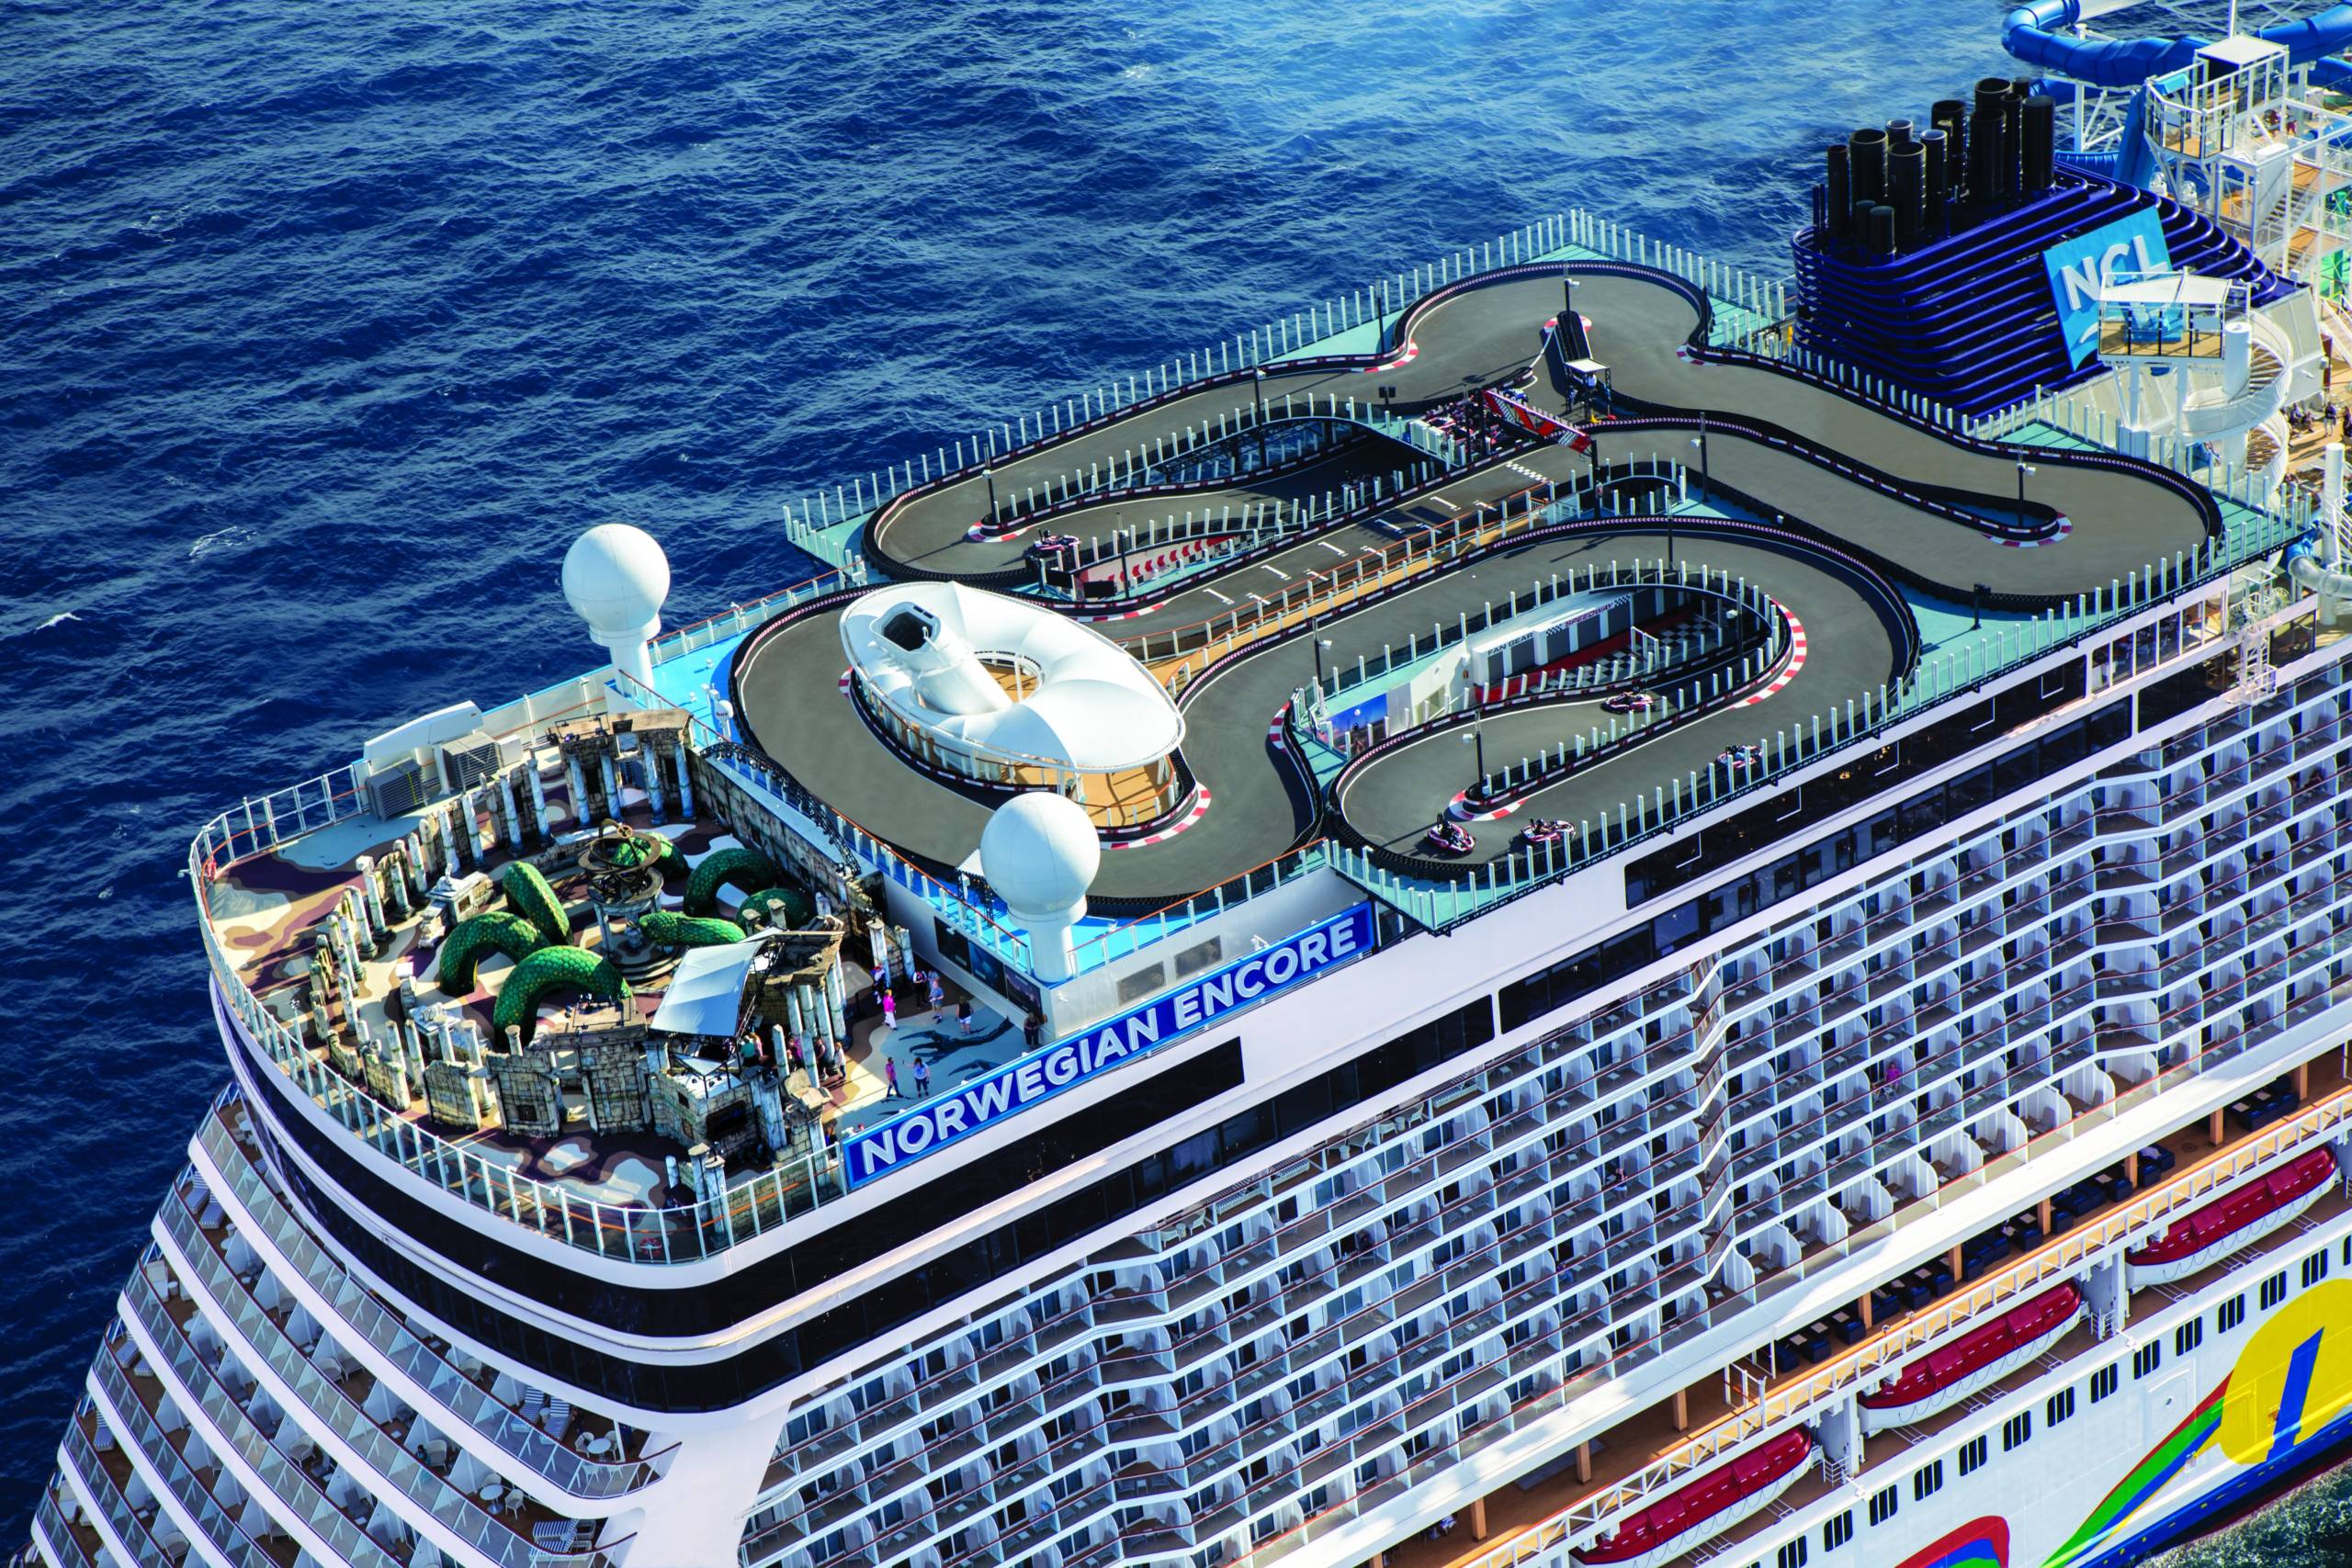 A go-kart track at the top of Norwegian Encore